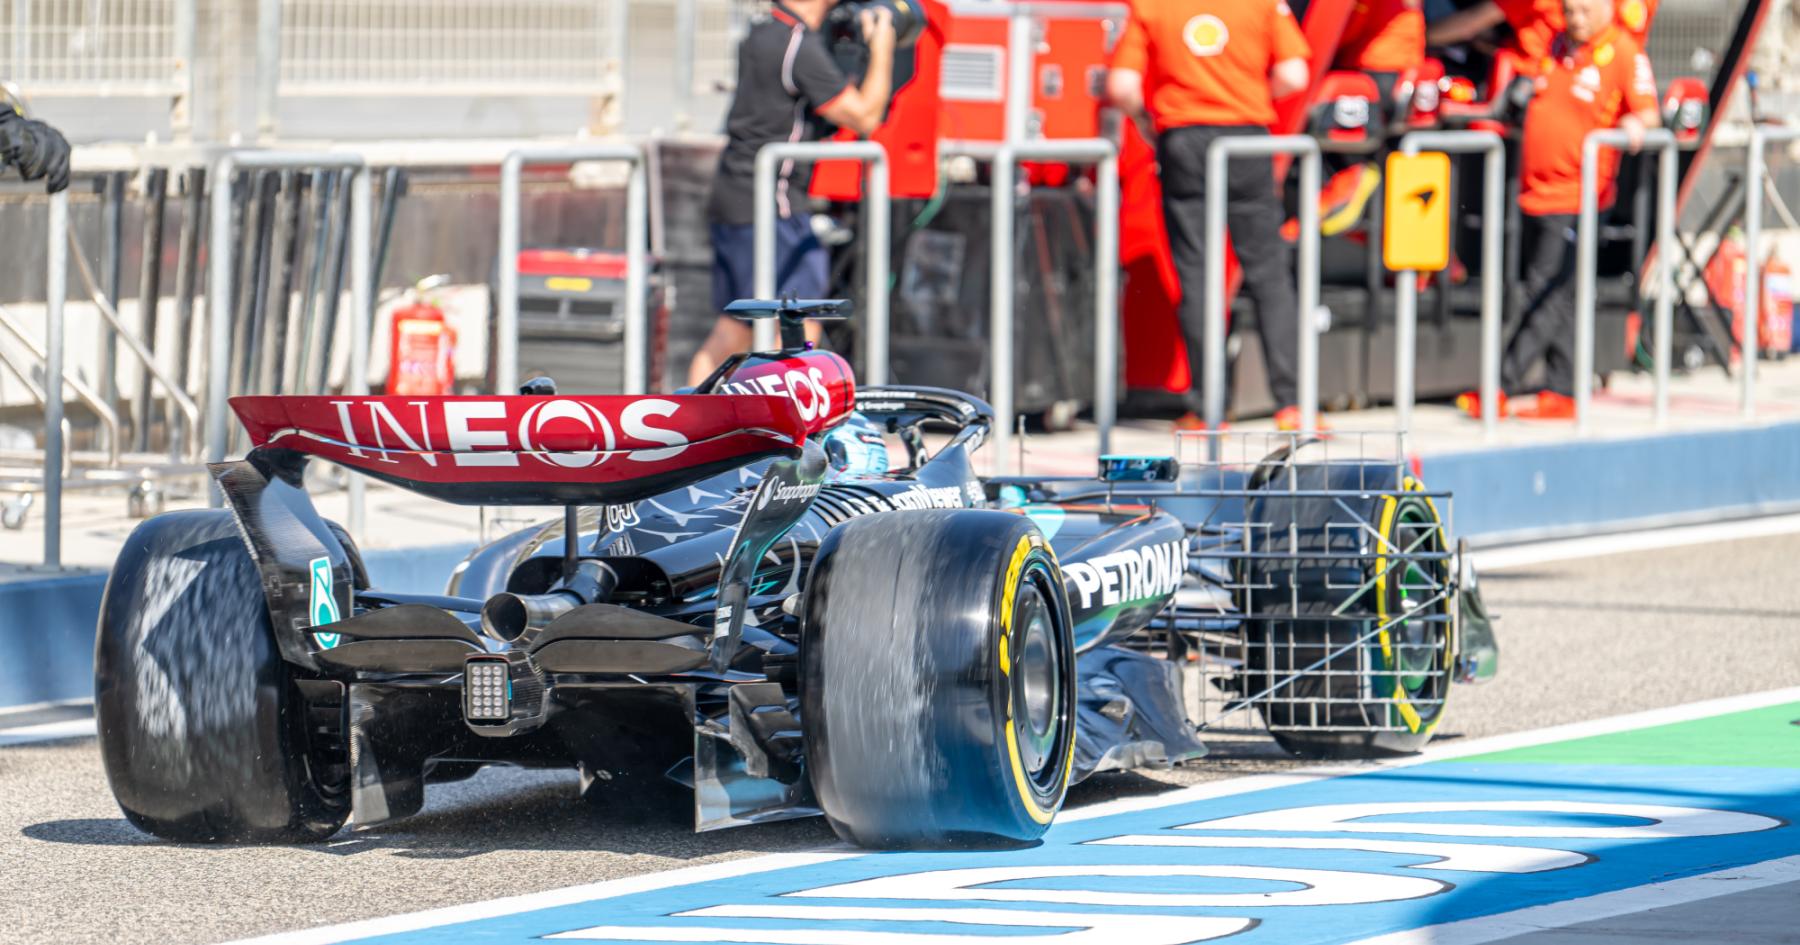 Revving Up the Competition: Mercedes Contemplates Strategic Moves to Stay Ahead of Ferrari's Challenge - Insights from Russell